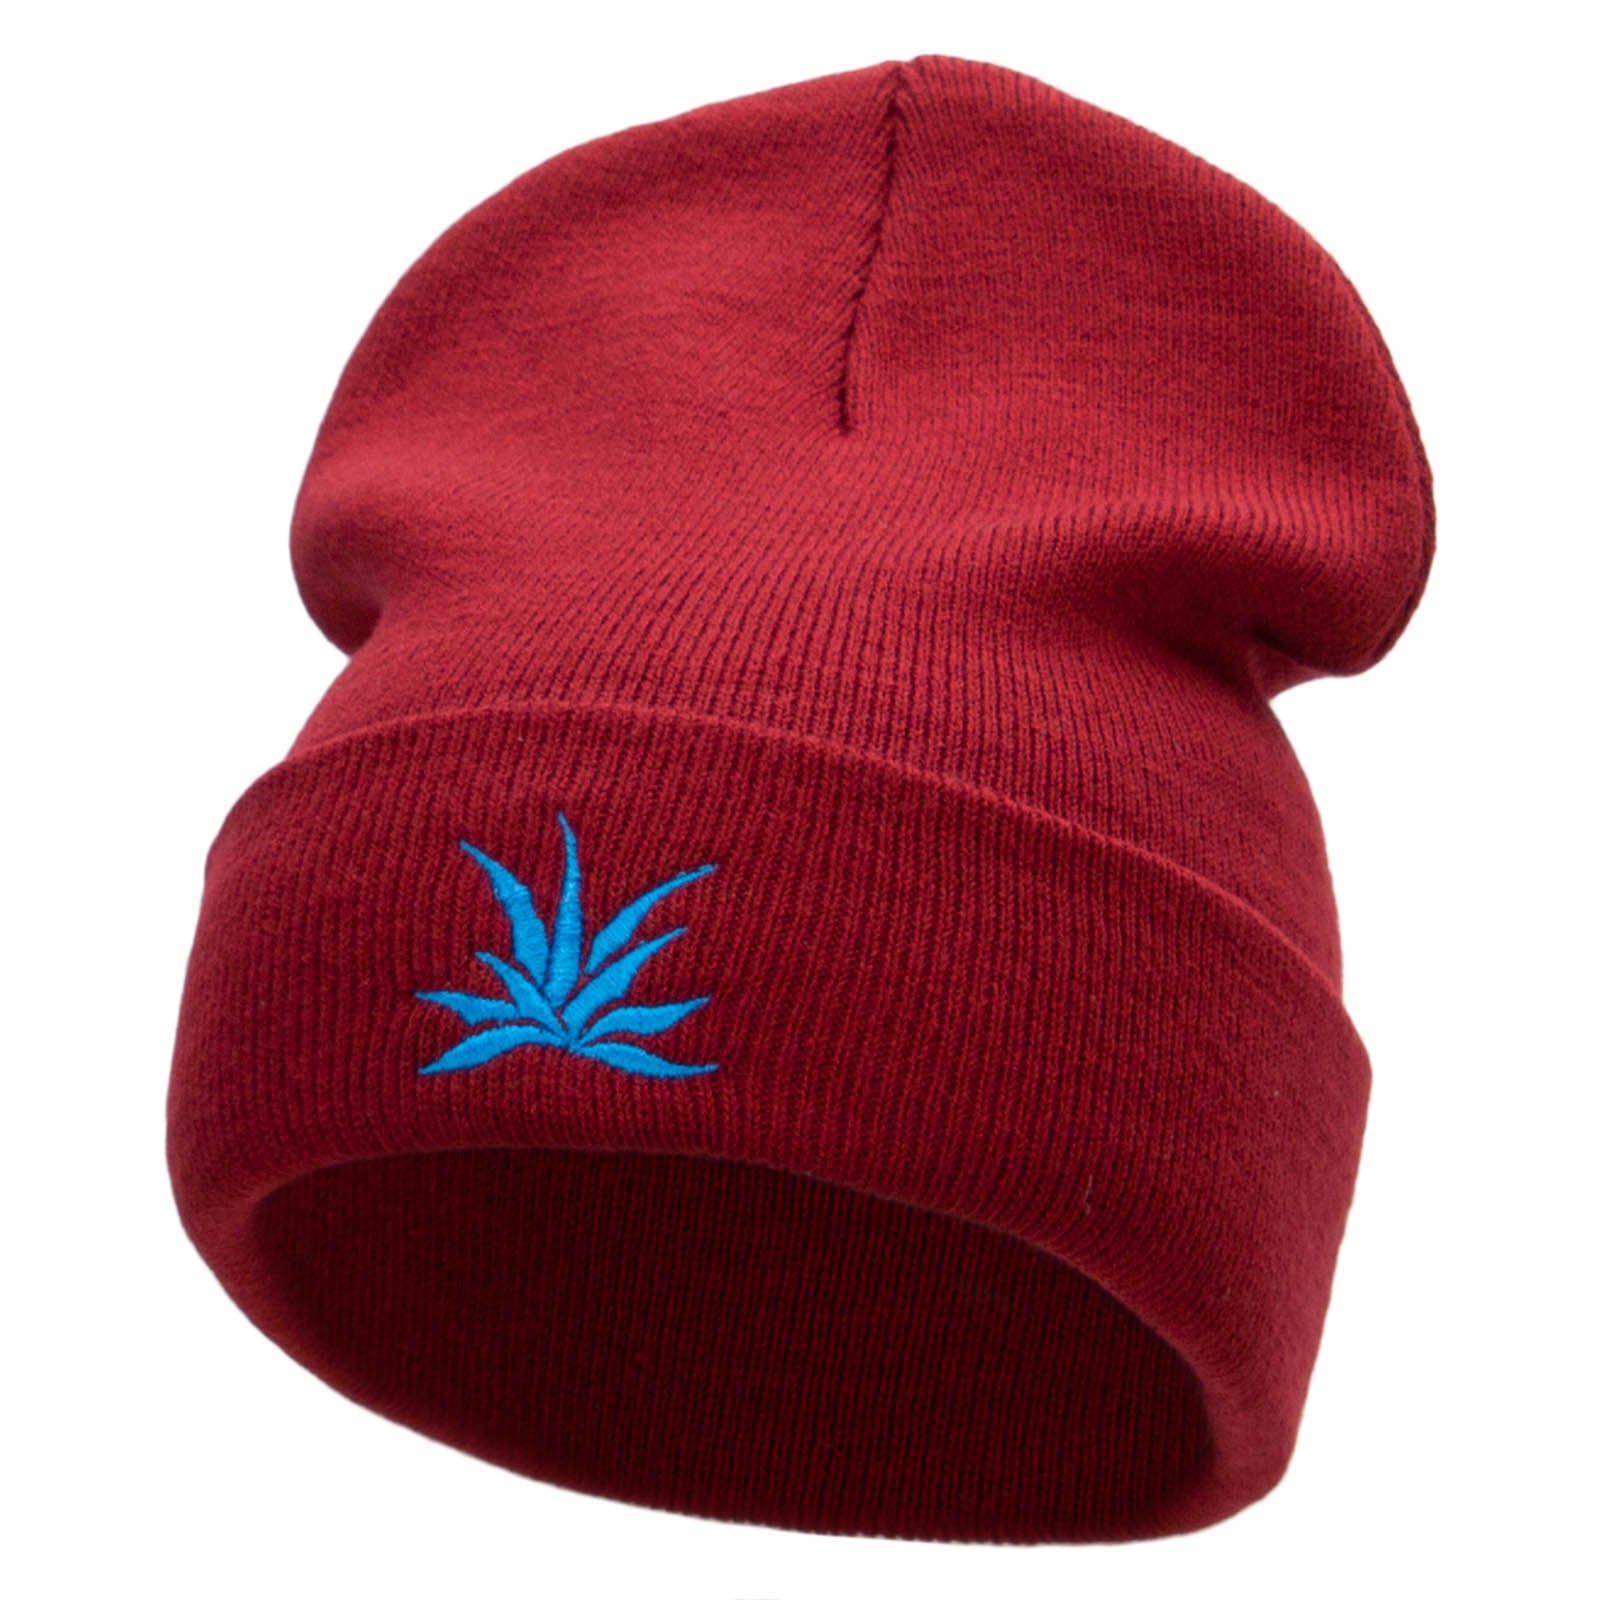 El Blue Agave Embroidered 12 Inch Long Knitted Beanie - Maroon OSFM